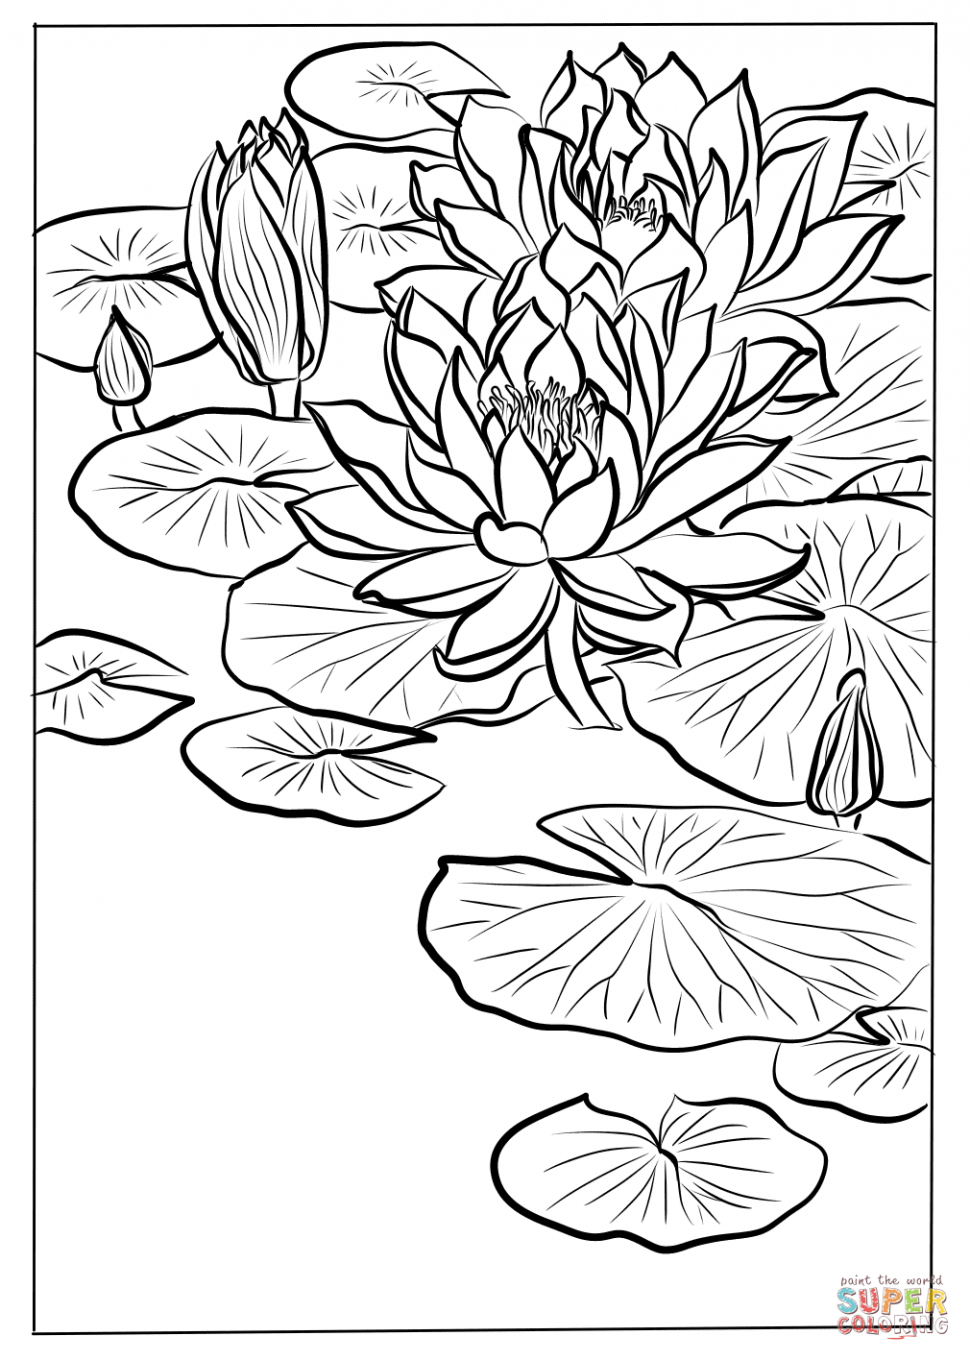 water-lily-flower-drawing-at-getdrawings-free-download